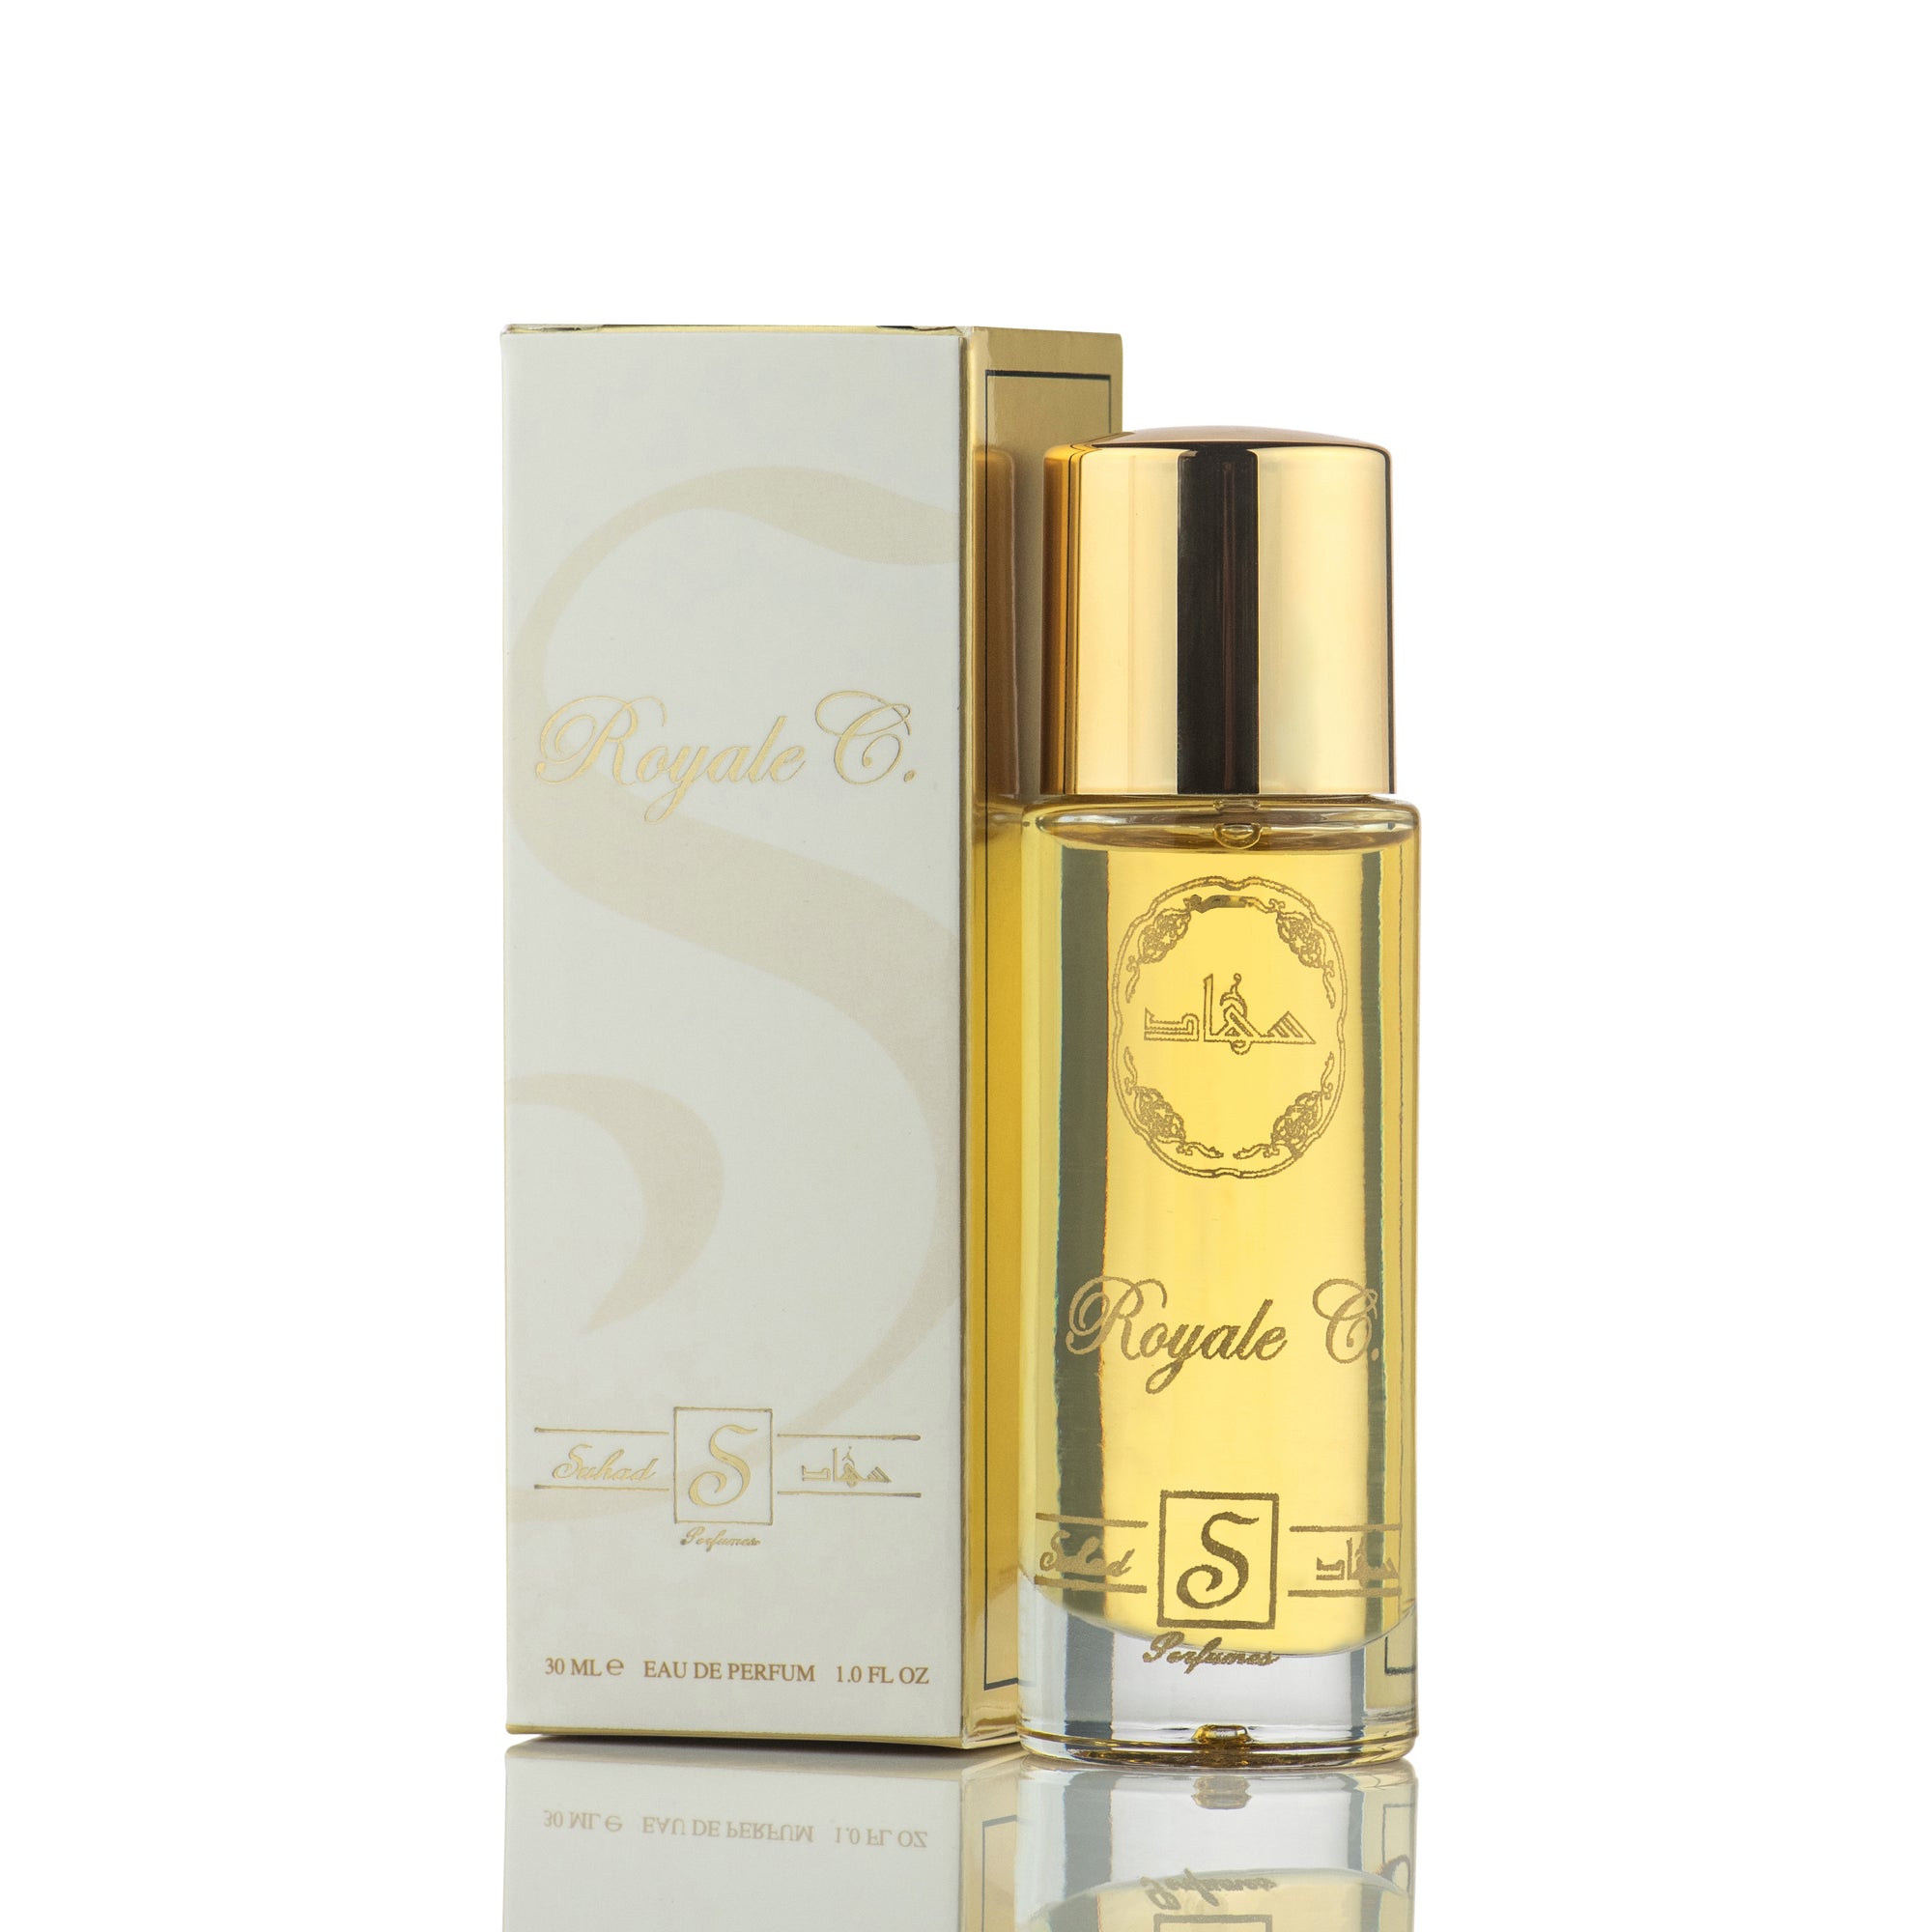 ROYALE C (Concentrated Body Oil)